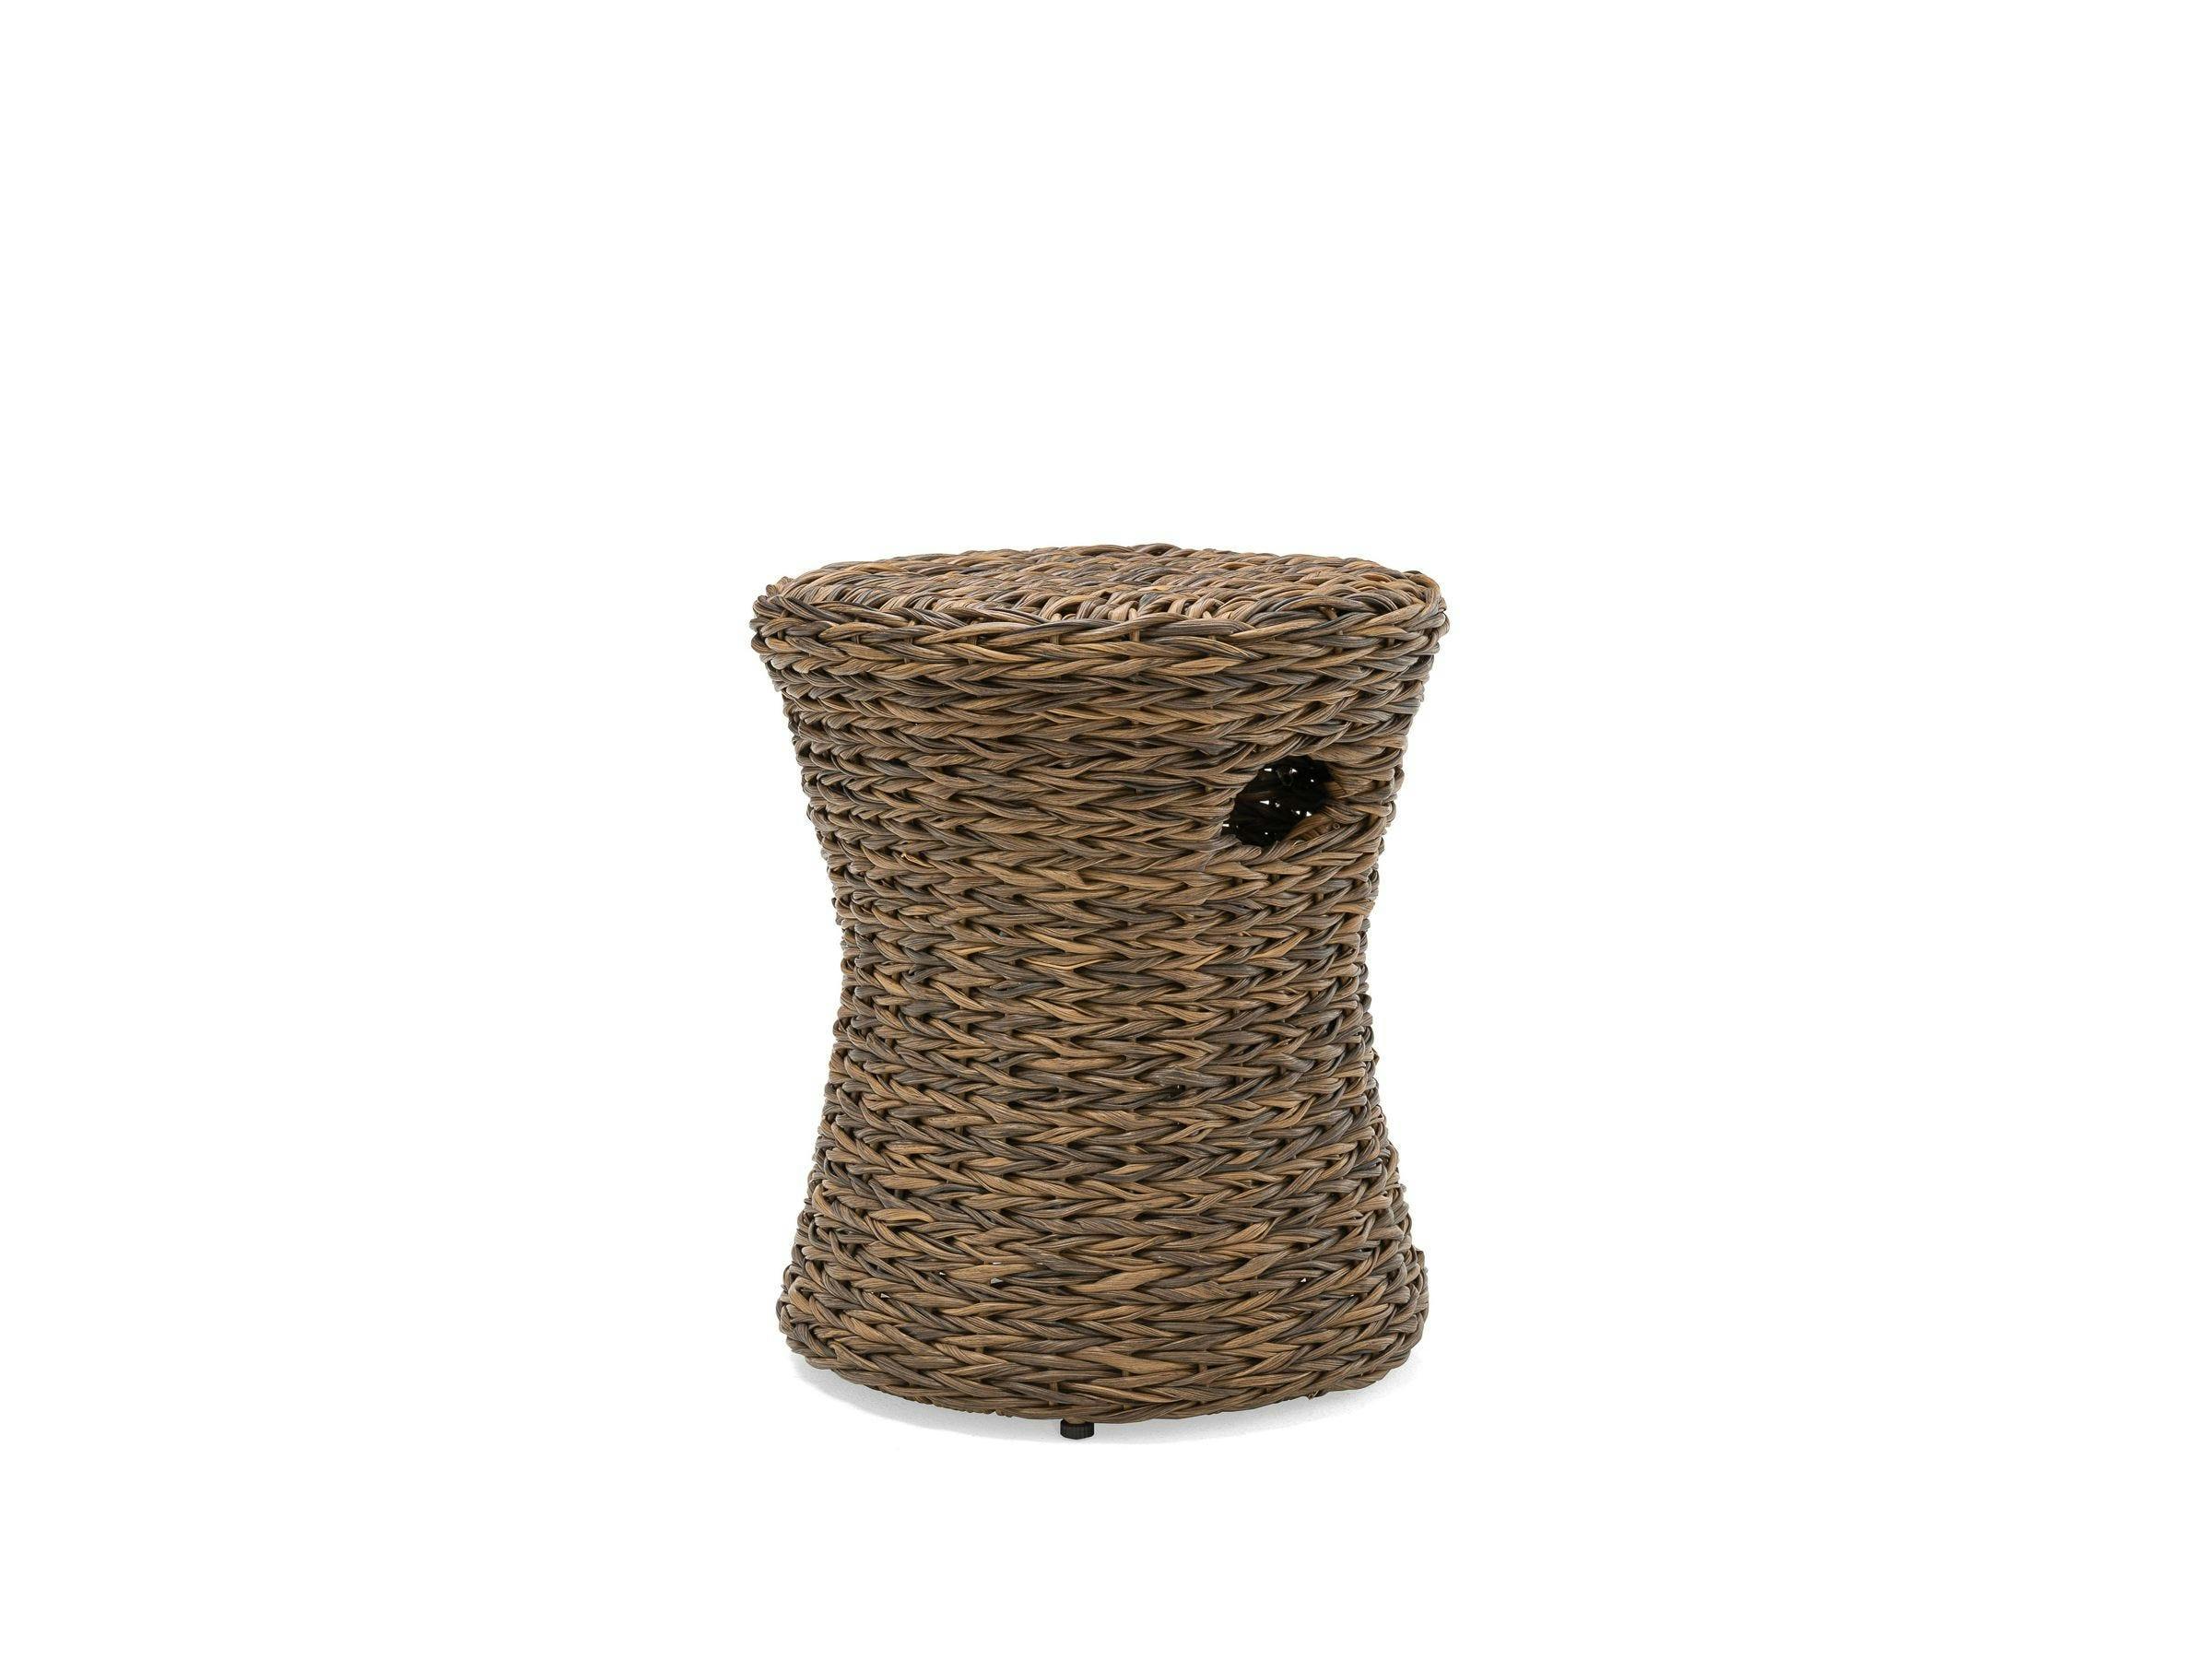 Cayman Woven Drum Stool/Side Table  